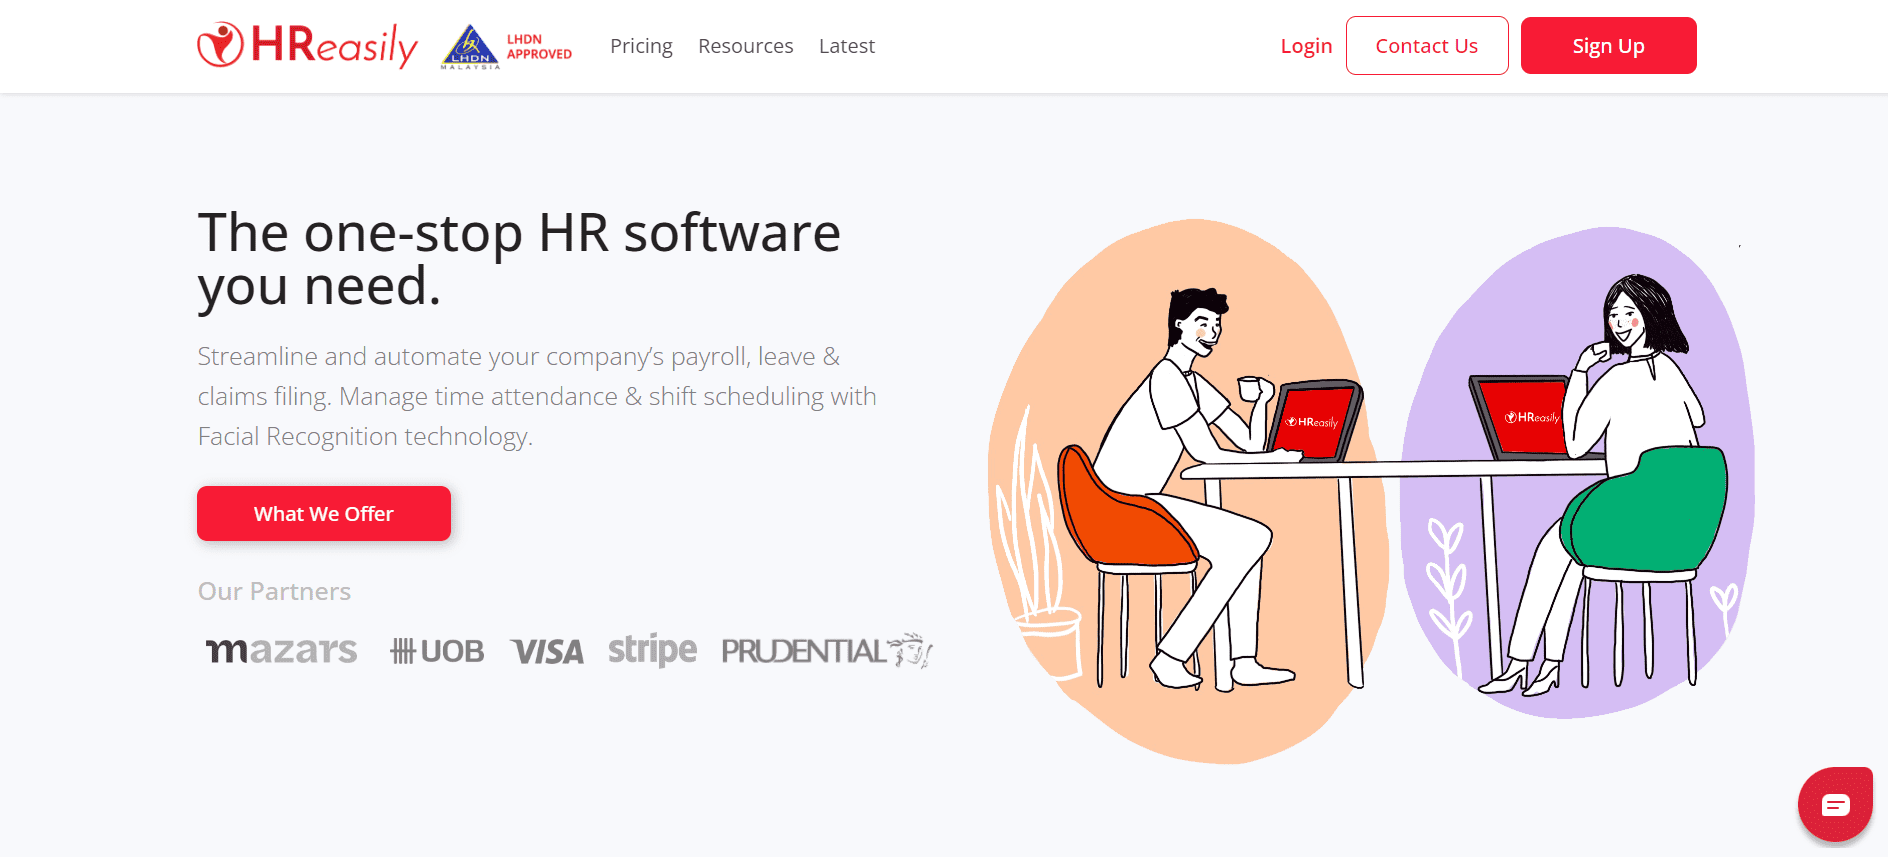 Homepage of HReasily, showing avatar of two person and on the side it's mentioned "the one stop hr you need"